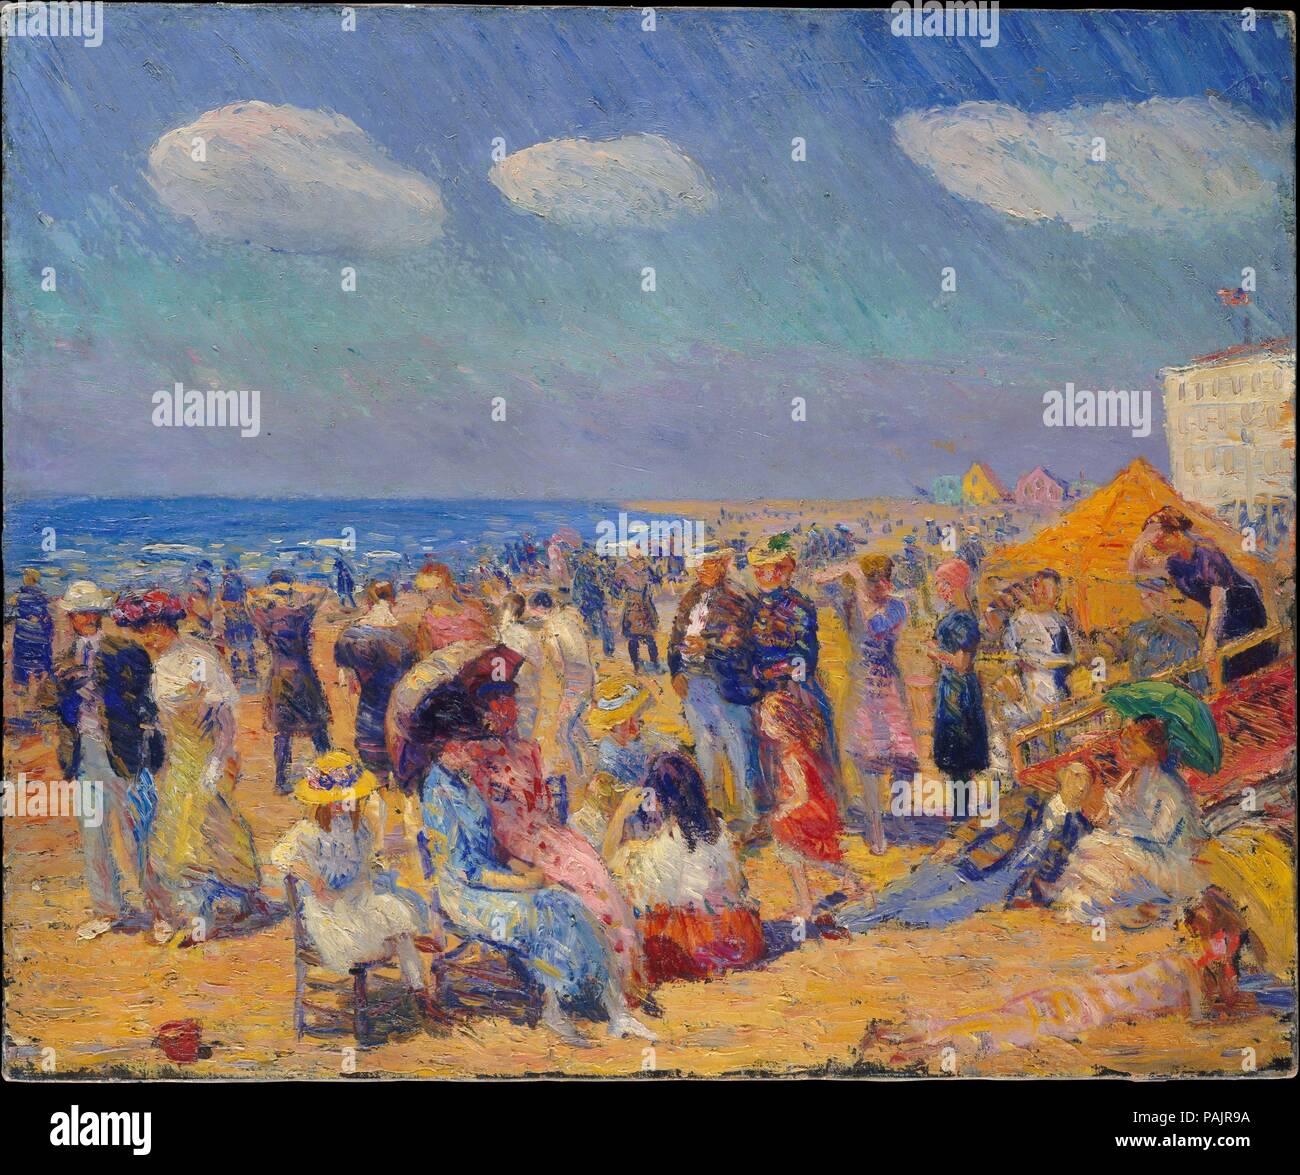 Crowd at the Seashore. Artist: William James Glackens (American, Philadelphia, Pennsylvania 1870-1938 Westport, Connecticut). Dimensions: 25 x 30 in. (63.5 x 76.2 cm). Date: ca. 1910.  Like his fellow urban realists, Glackens was drawn to Coney Island, and this painting may depict the democratic throngs that gathered there. The number and variety of beachgoers suggest the socioeconomic diversity of New York, and imbue the painting with a lively, modern spirit. To heighten the scene's energy, Glackens used a vibrant palette and vigorous brushwork, applying saturated oranges and blues to evoke t Stock Photo